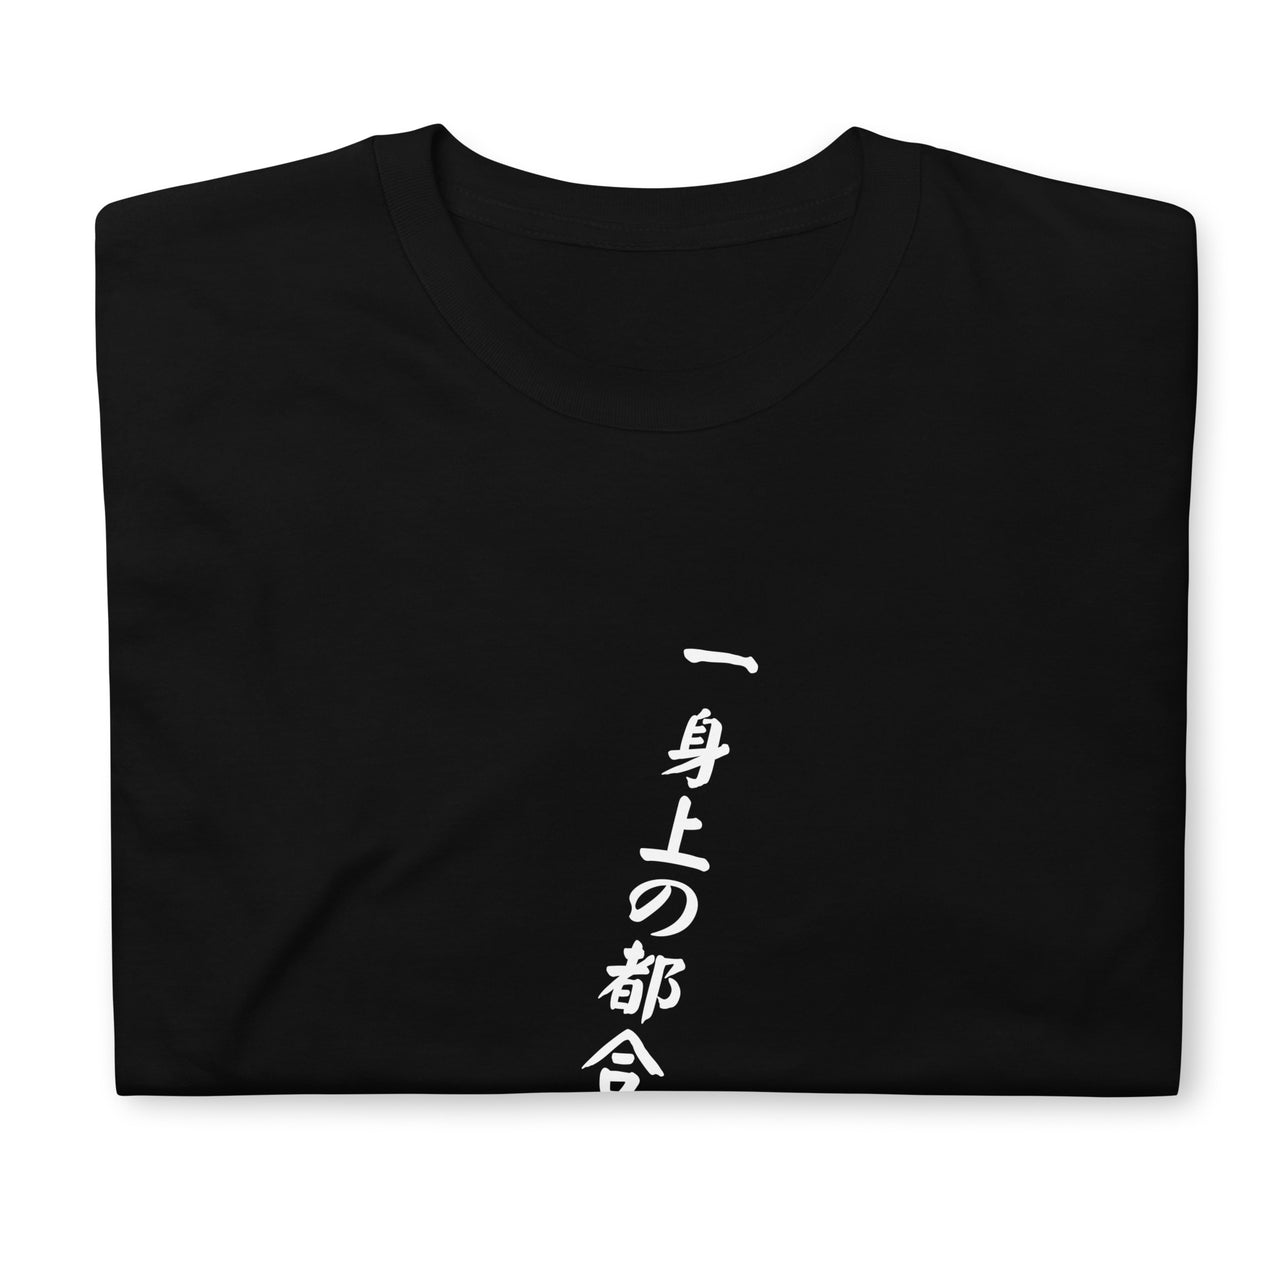 For Personal Reasons Japanese Short-Sleeve Unisex T-Shirt